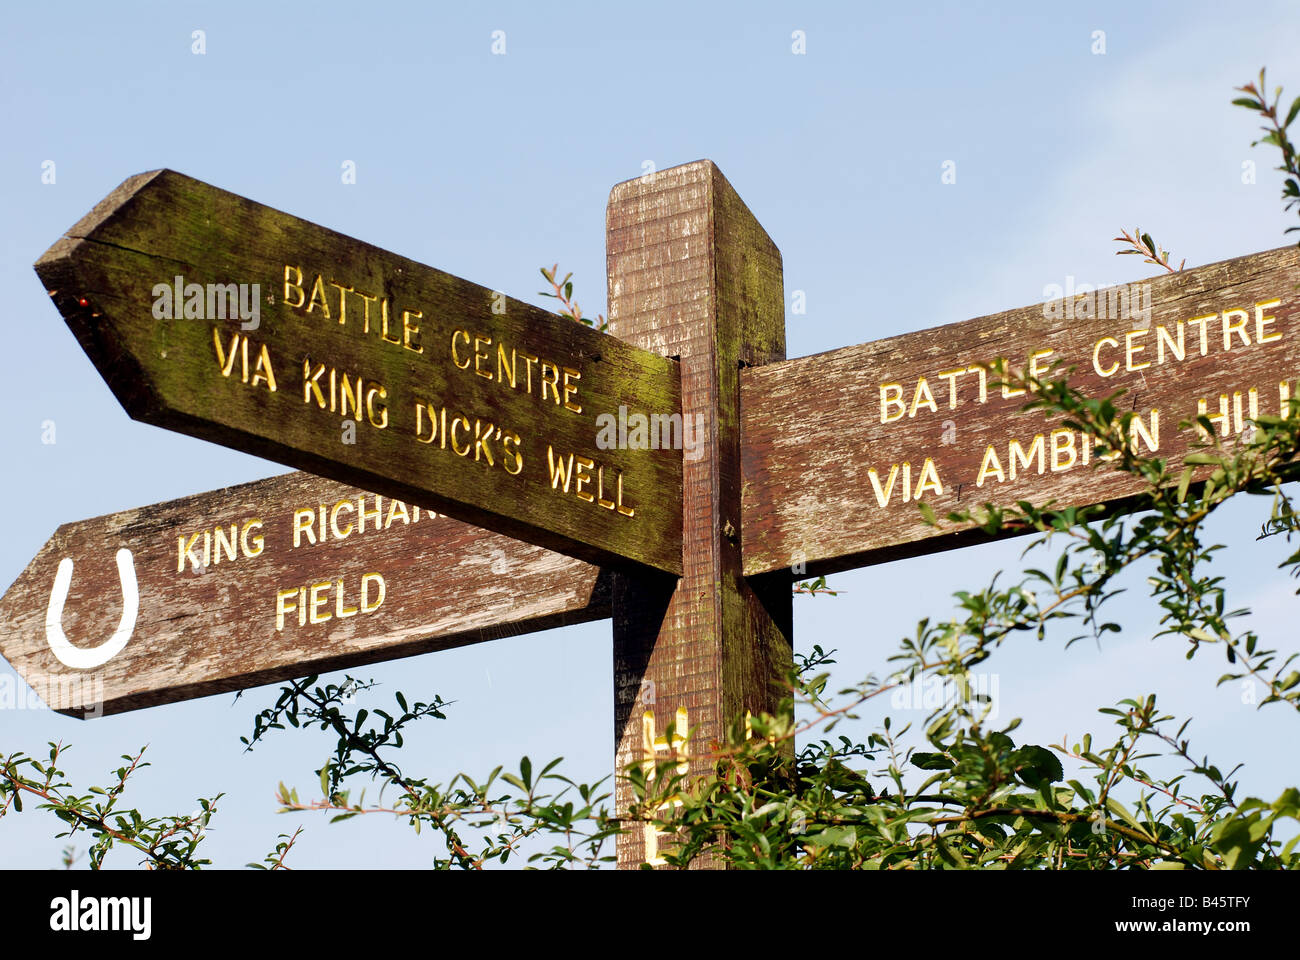 Signpost at Battle of Bosworth site Leicestershire England UK Stock Photo